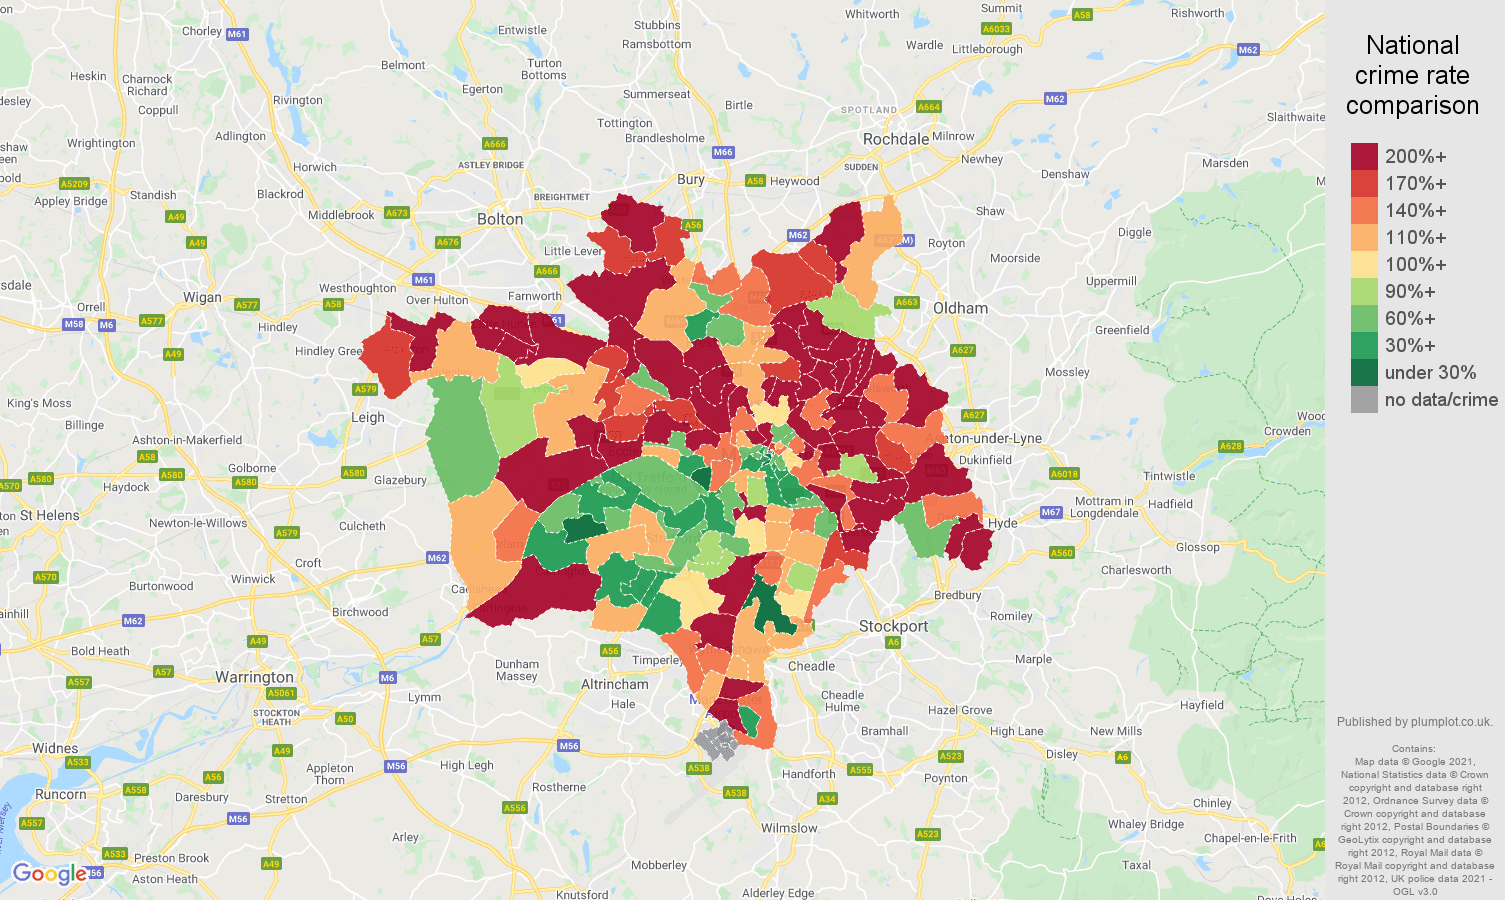 Manchester other crime rate comparison map